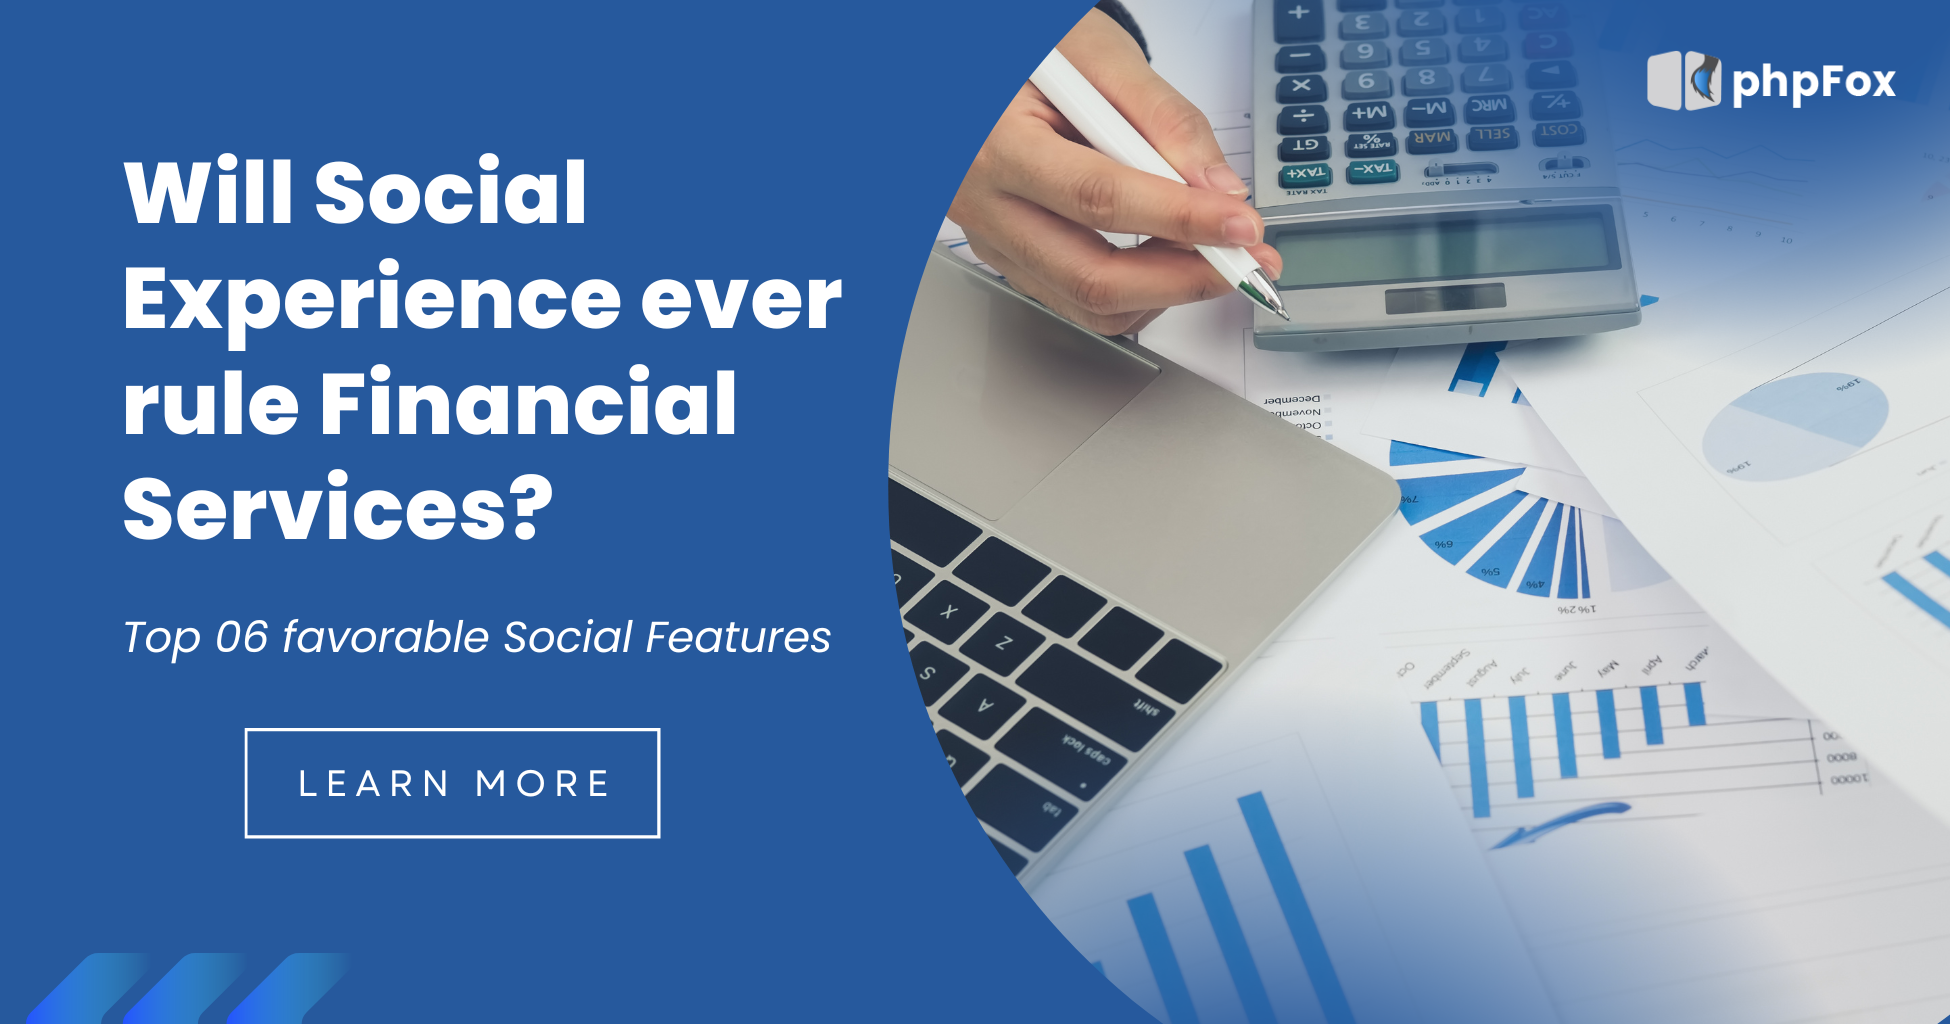 Will social experience ever rule financial services: Top 06 favorable social features